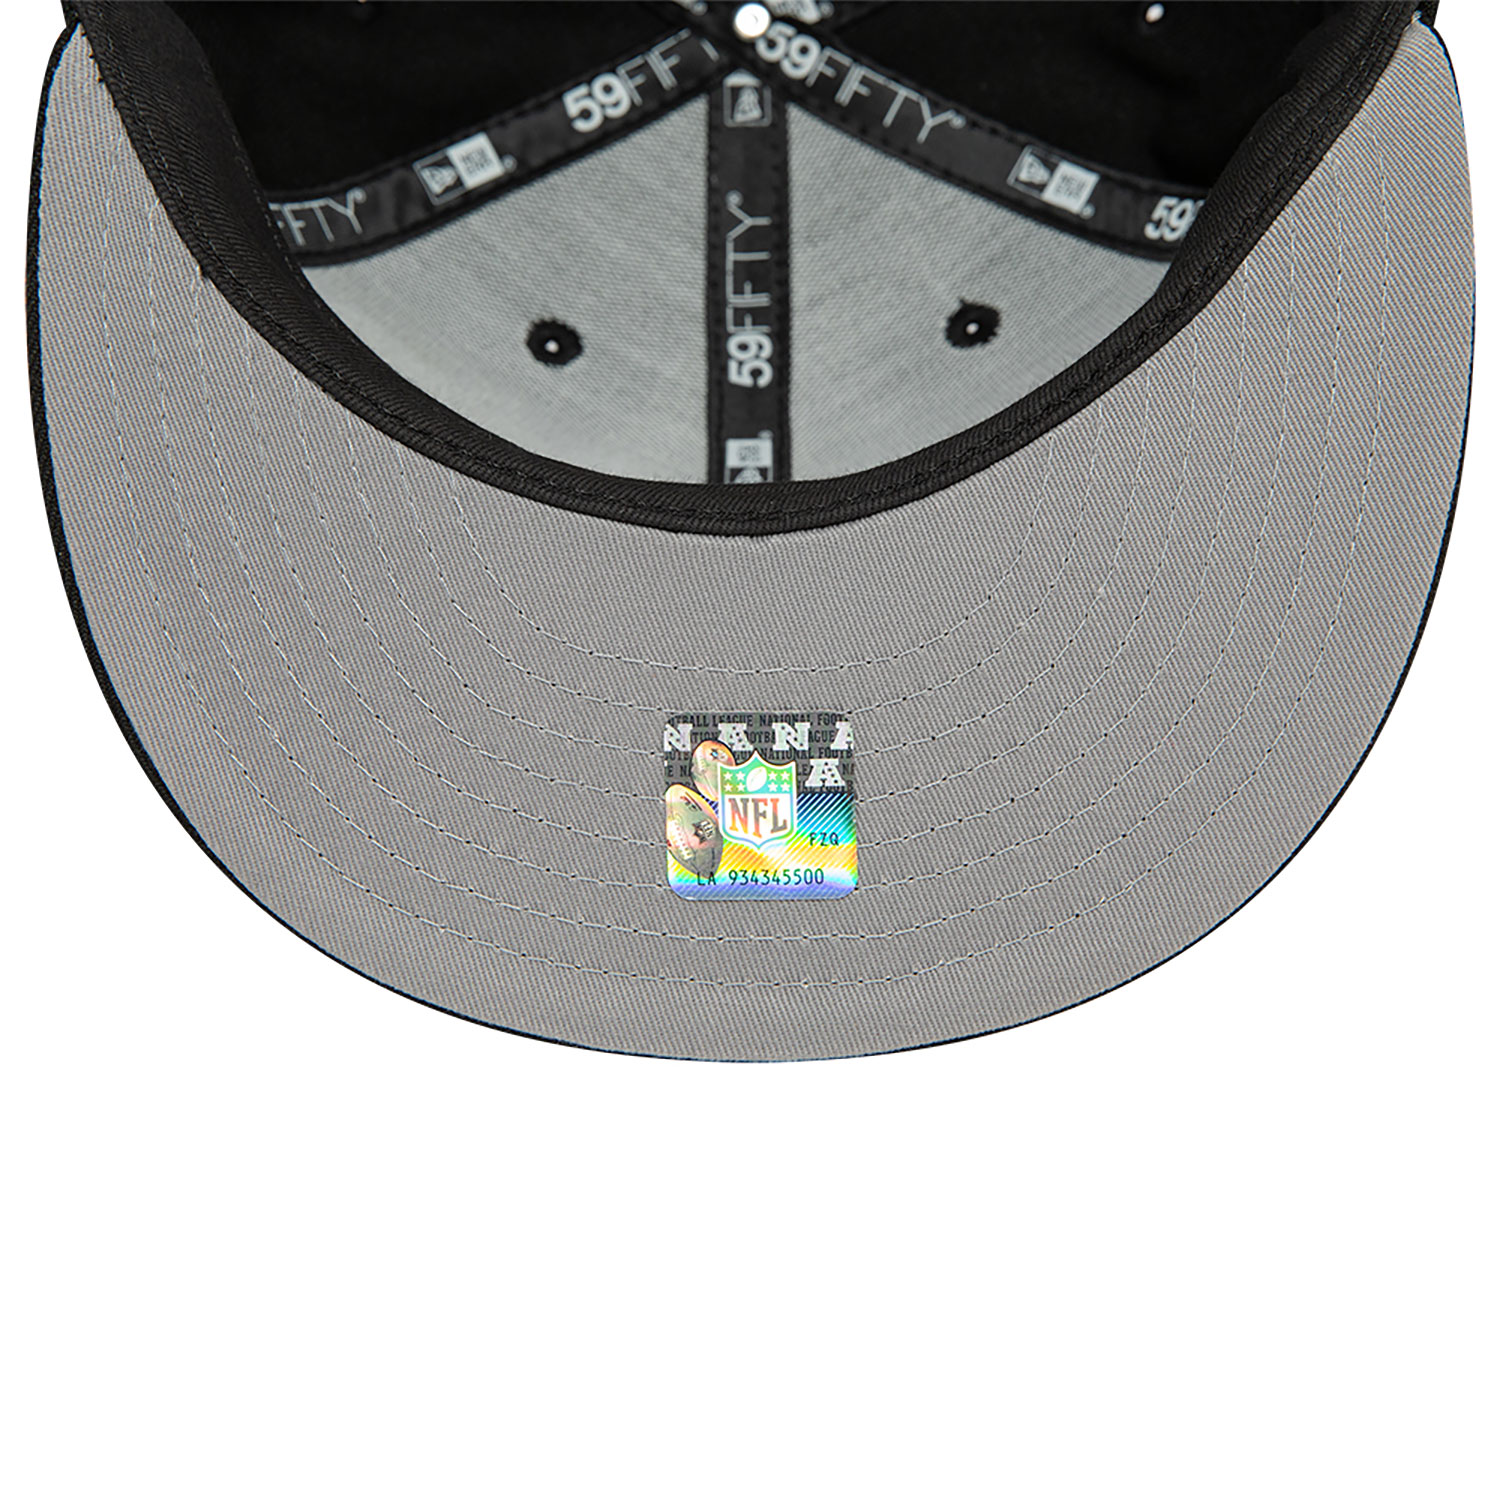 Seattle Seahawks NFL Sideline 2023 Black 59FIFTY Fitted Cap